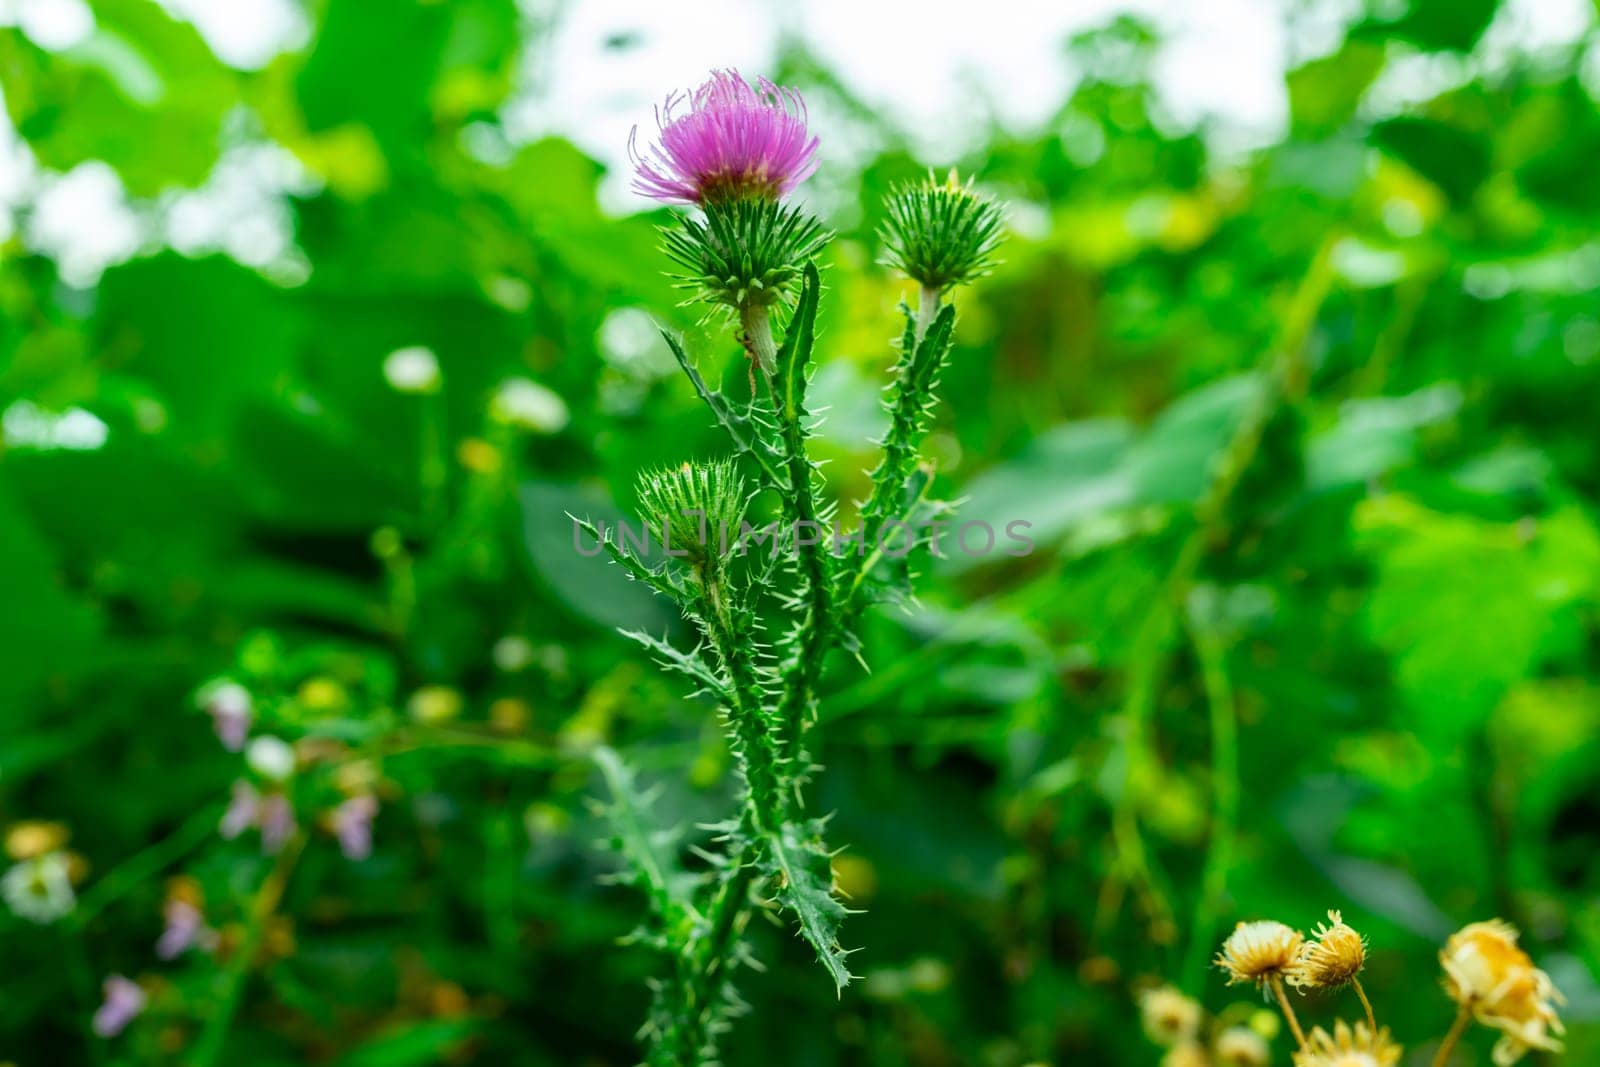 Purple thistle flowers on a green background.